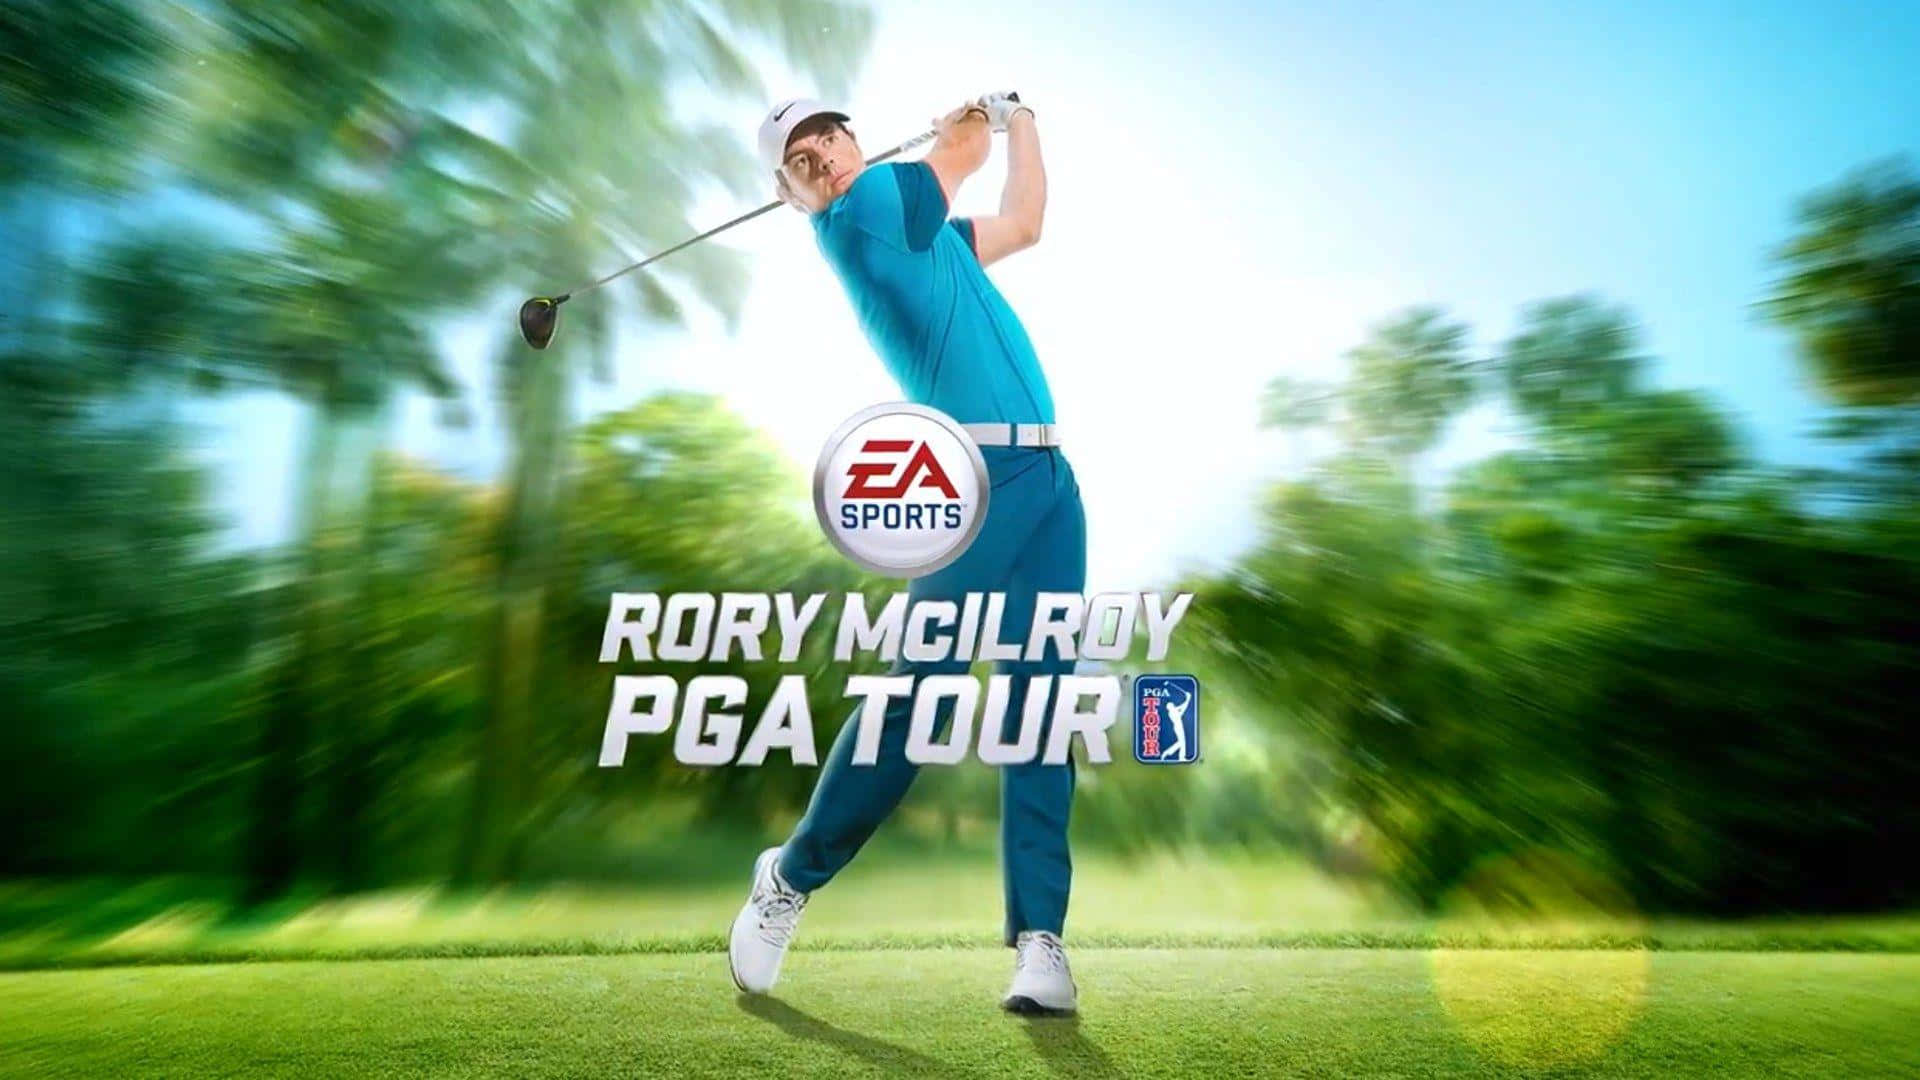 Rory McIlroy All-Star on the PGA Tour Wallpaper